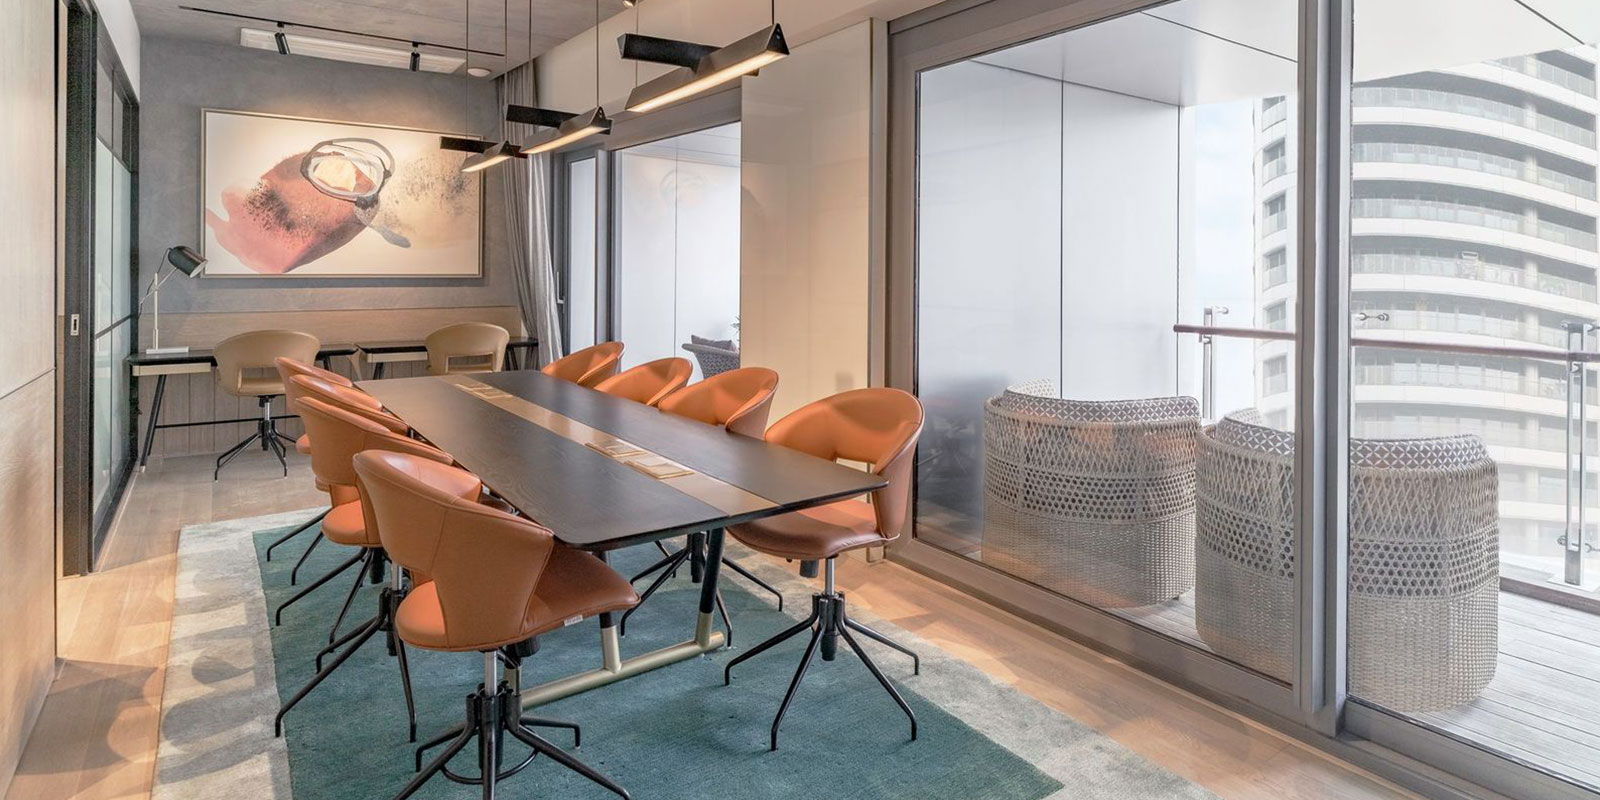 A versatile space to exchange ideas, to engage with like-minded people. This is the space dedicated to the ‘work’ aspect of the members club. Here you can find a comfortable and fully-equipped co-working area as well as two private meetings rooms for you to conduct meetings with discretion & privacy.